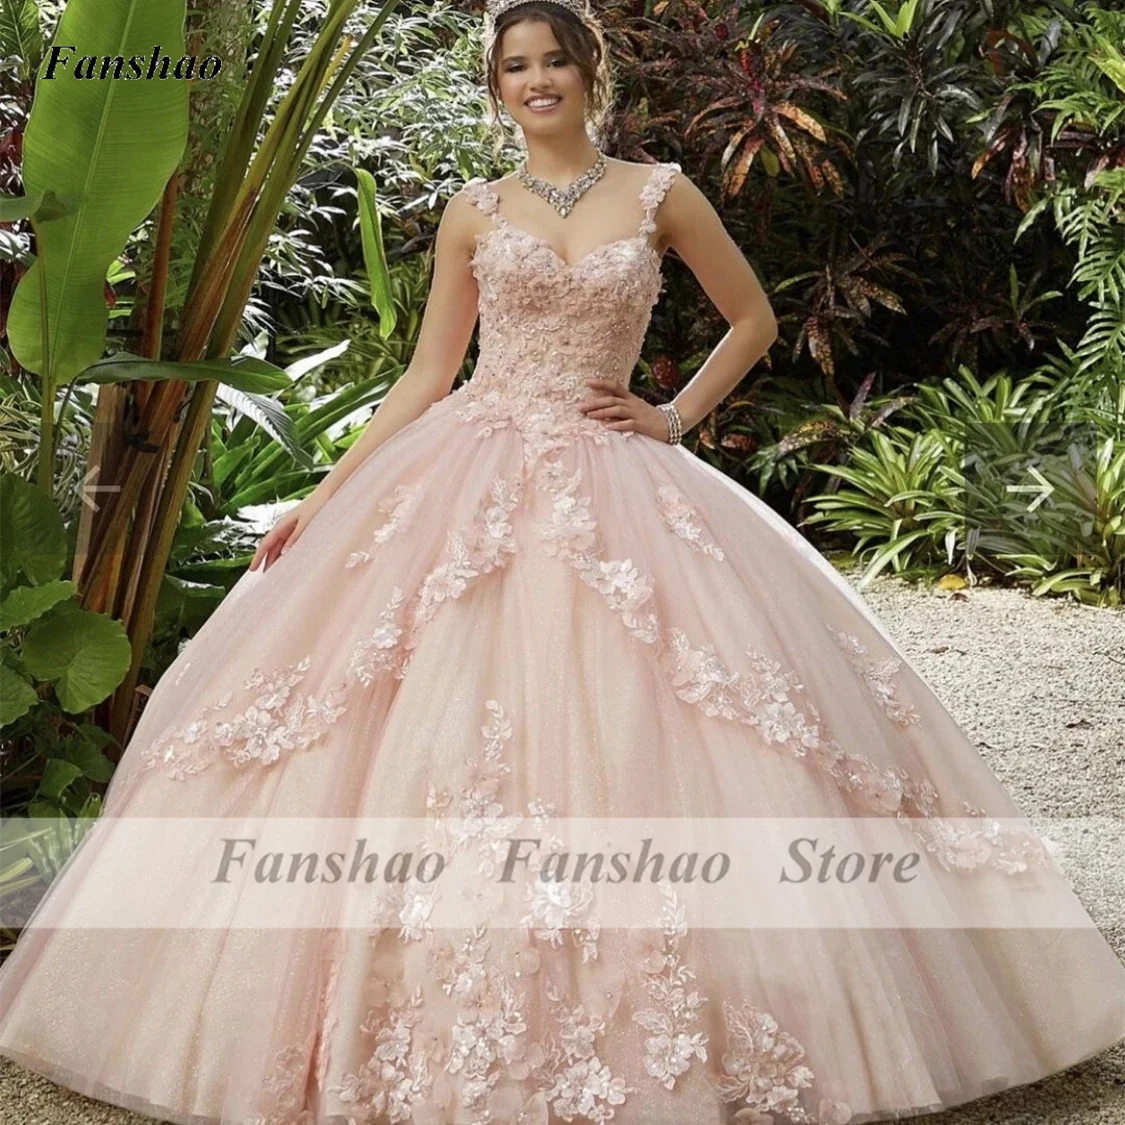 

Fanshao wd368 Princess Quinceanera Dress Sweet 16 Ball Gown Appliques Sequins Beads Flowers Backless Party Vestidos De 15 Años